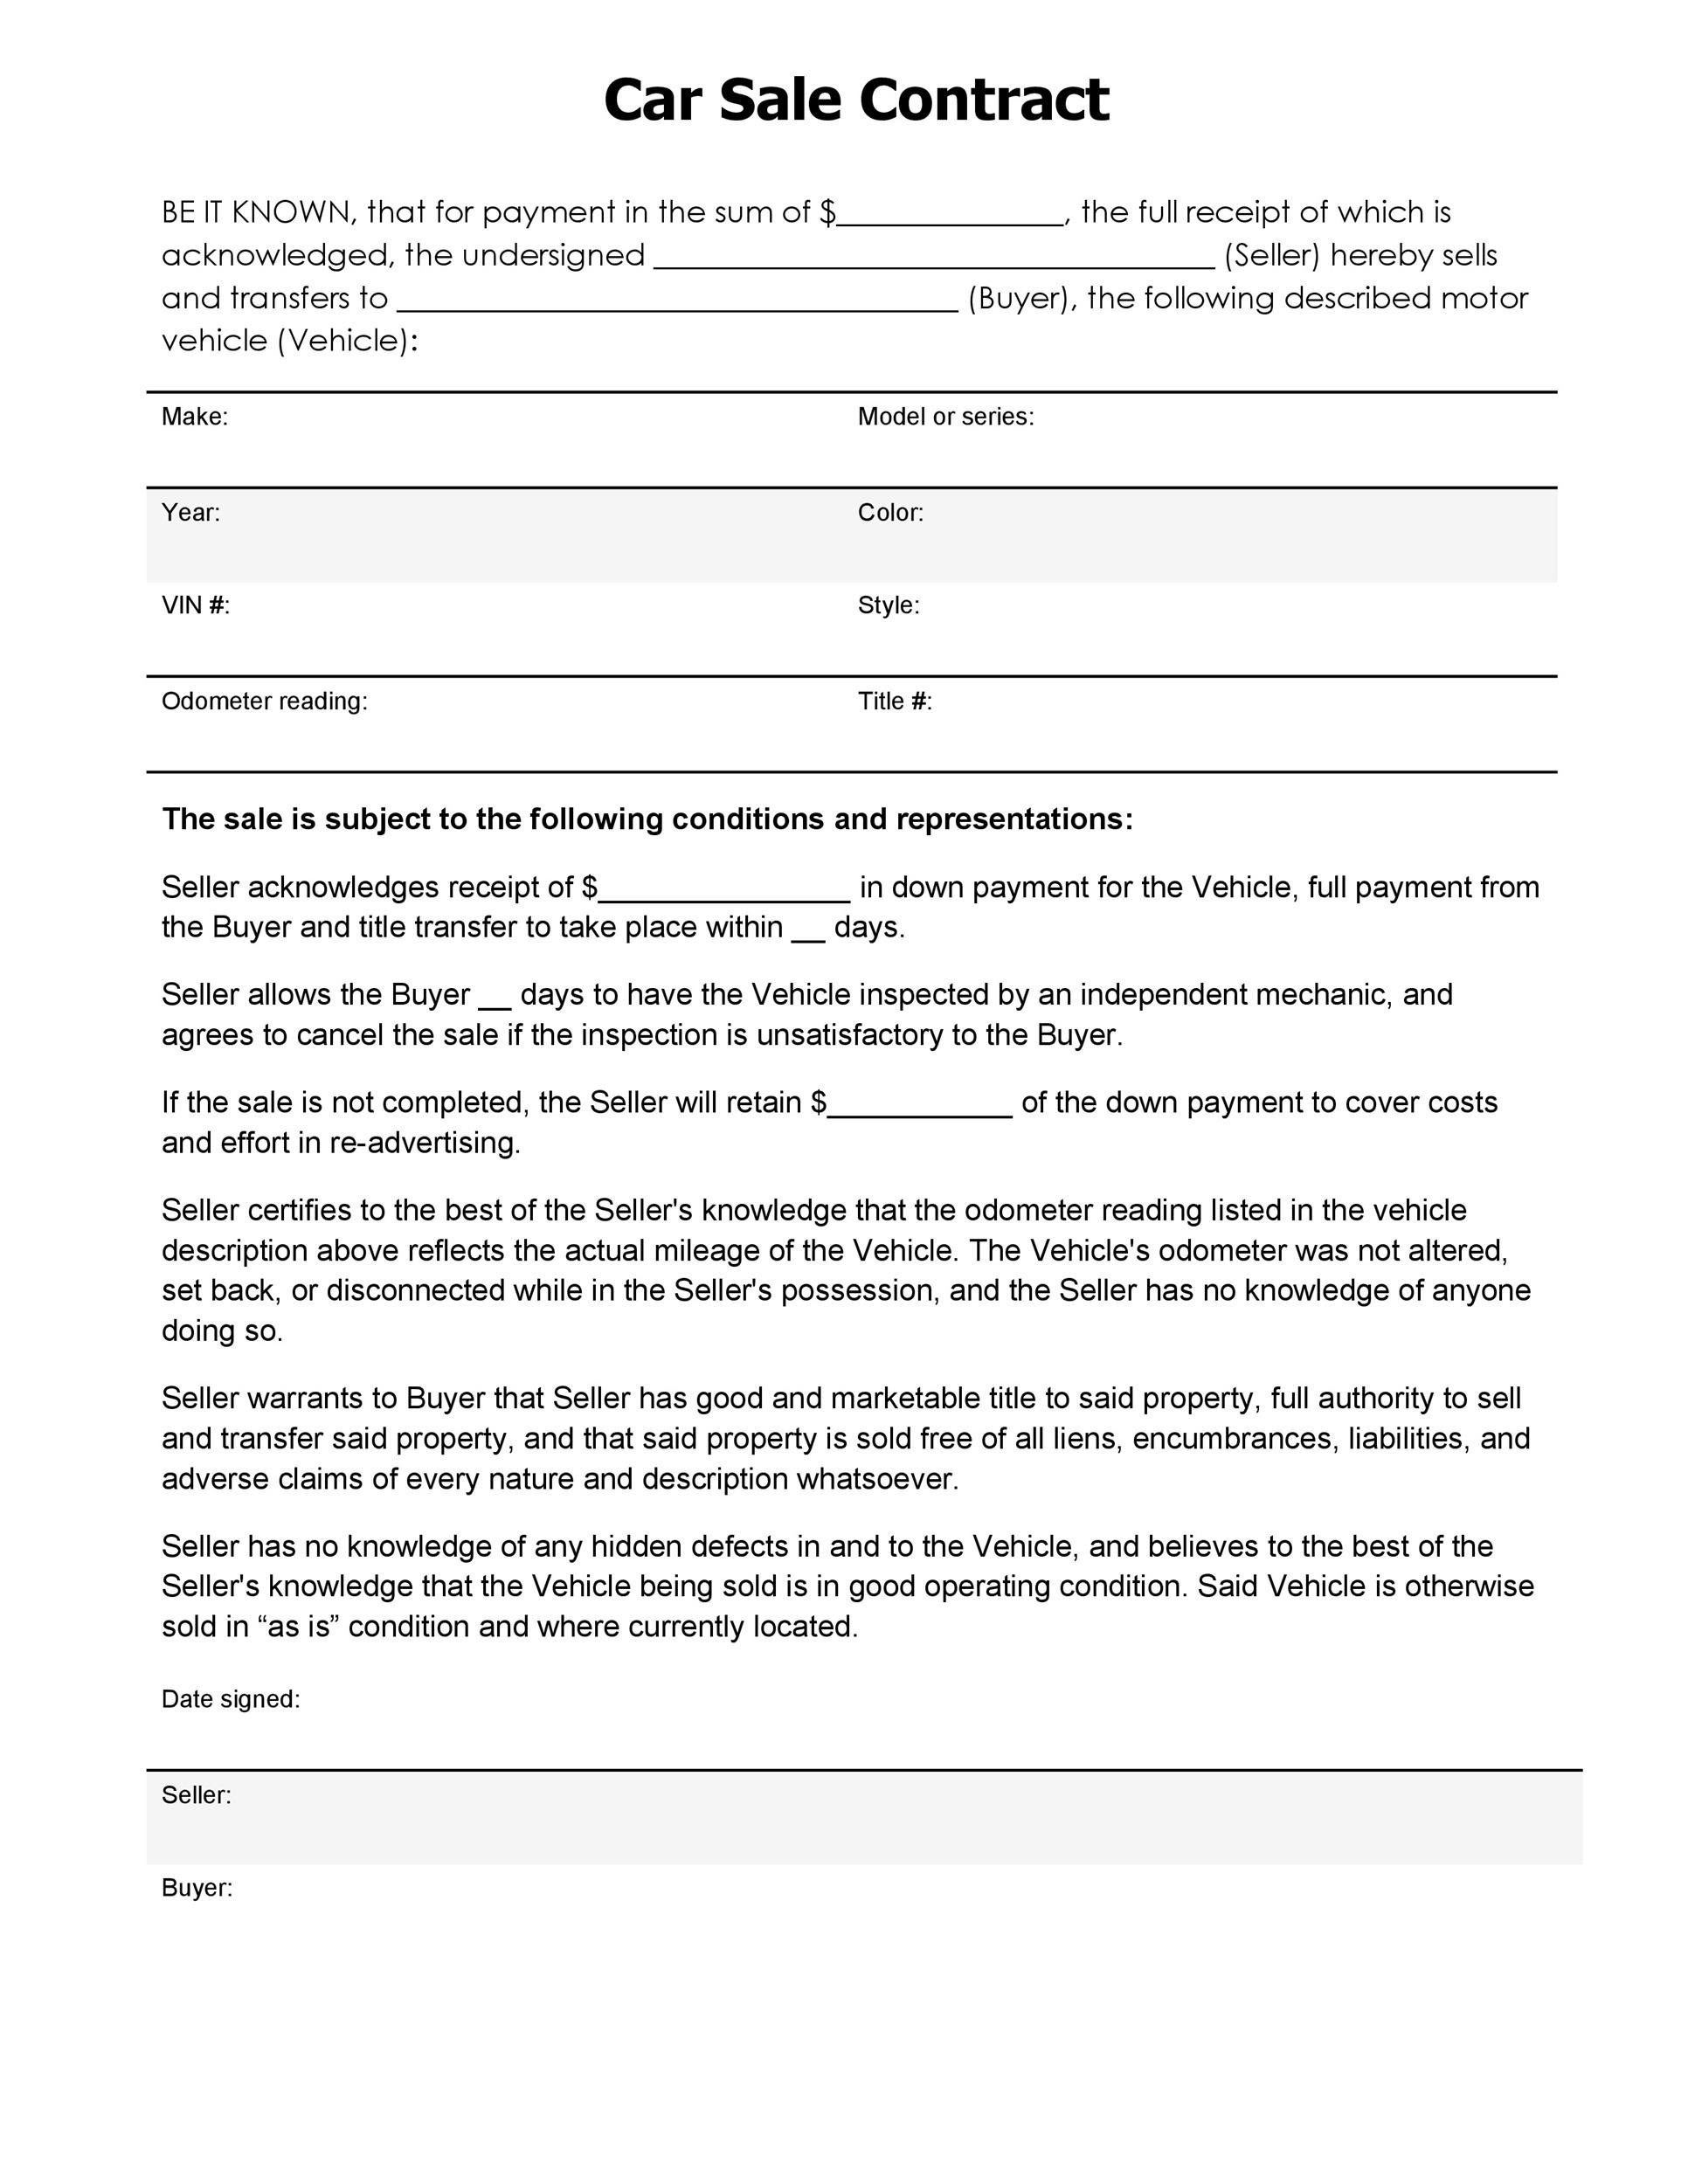 Sample Letter Of Car Sale Agreement The Document Template